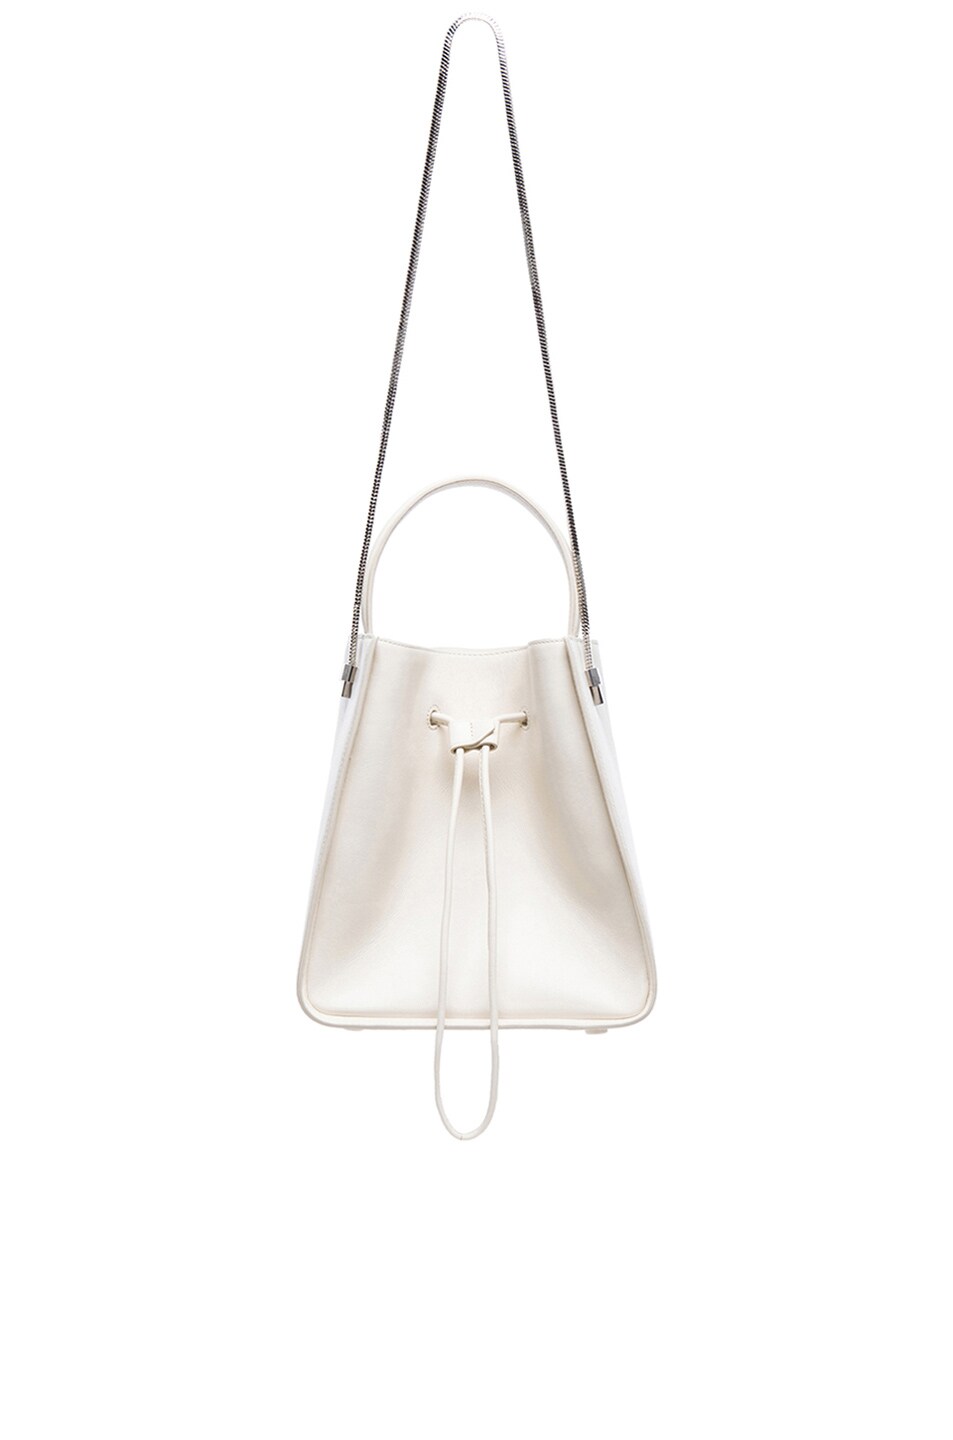 Image 1 of 3.1 phillip lim Small Soleil Bucket Bag in Off White